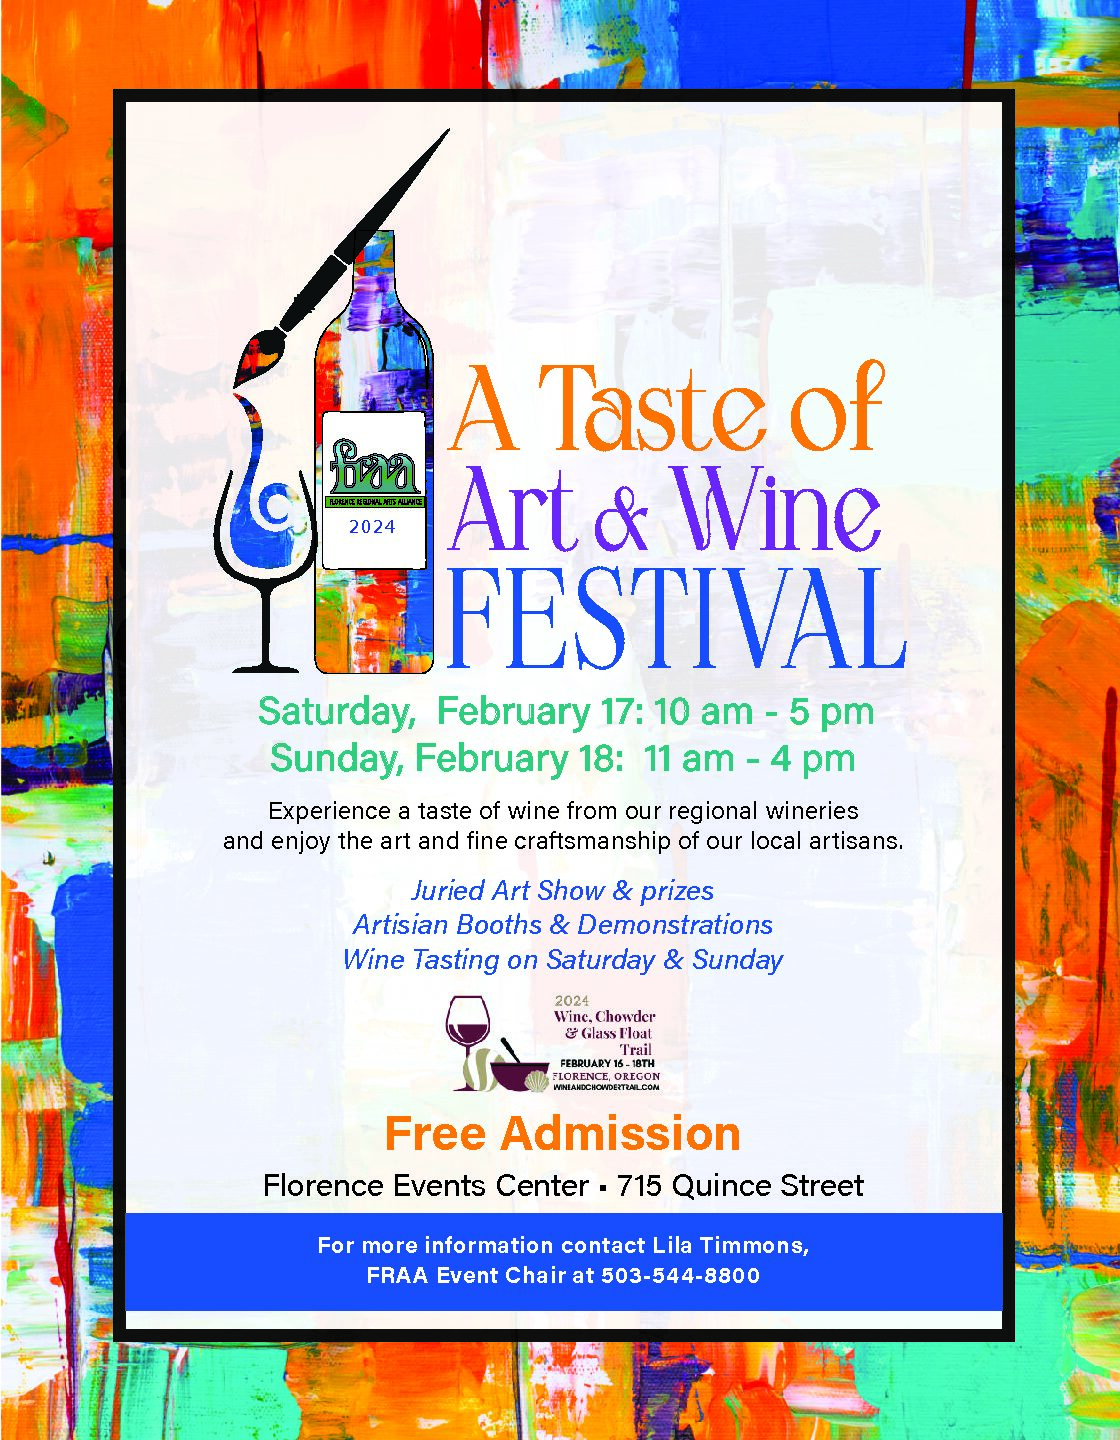 A Taste of Art and Wine Festival and Juried Art Show